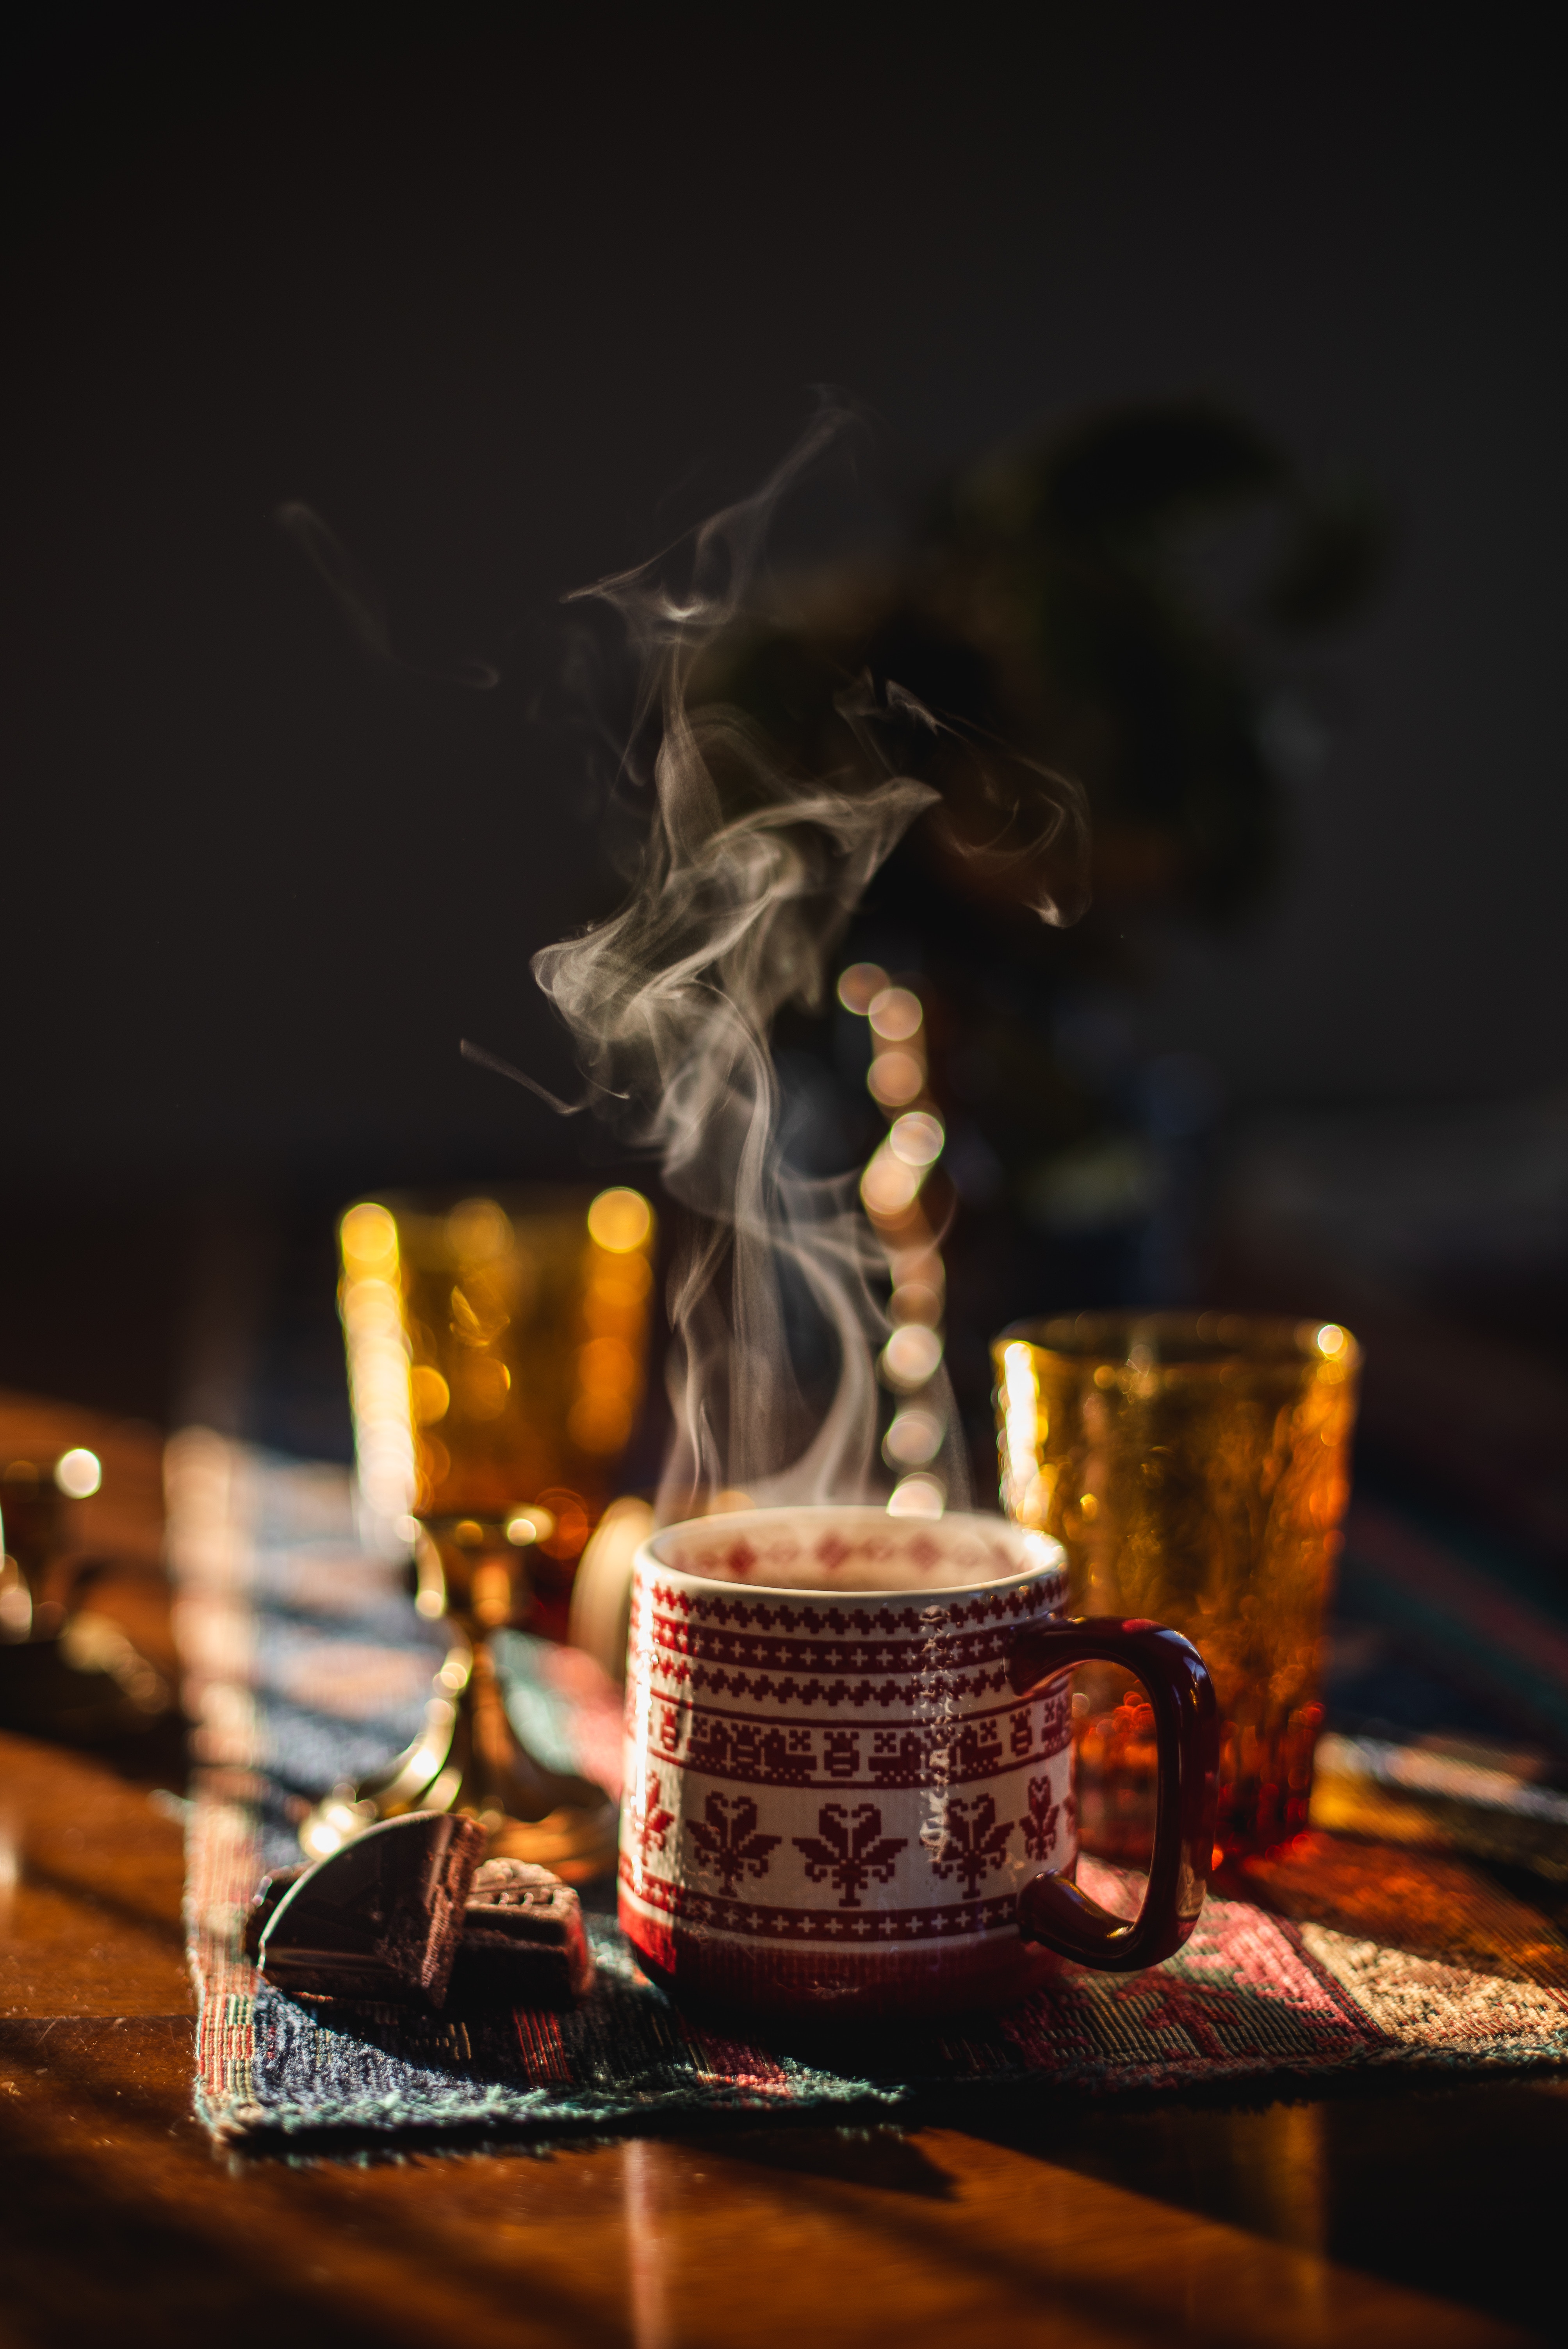 147684 Screensavers and Wallpapers Steam for phone. Download food, cup, drink, beverage, coziness, comfort, steam, heat, warmth pictures for free